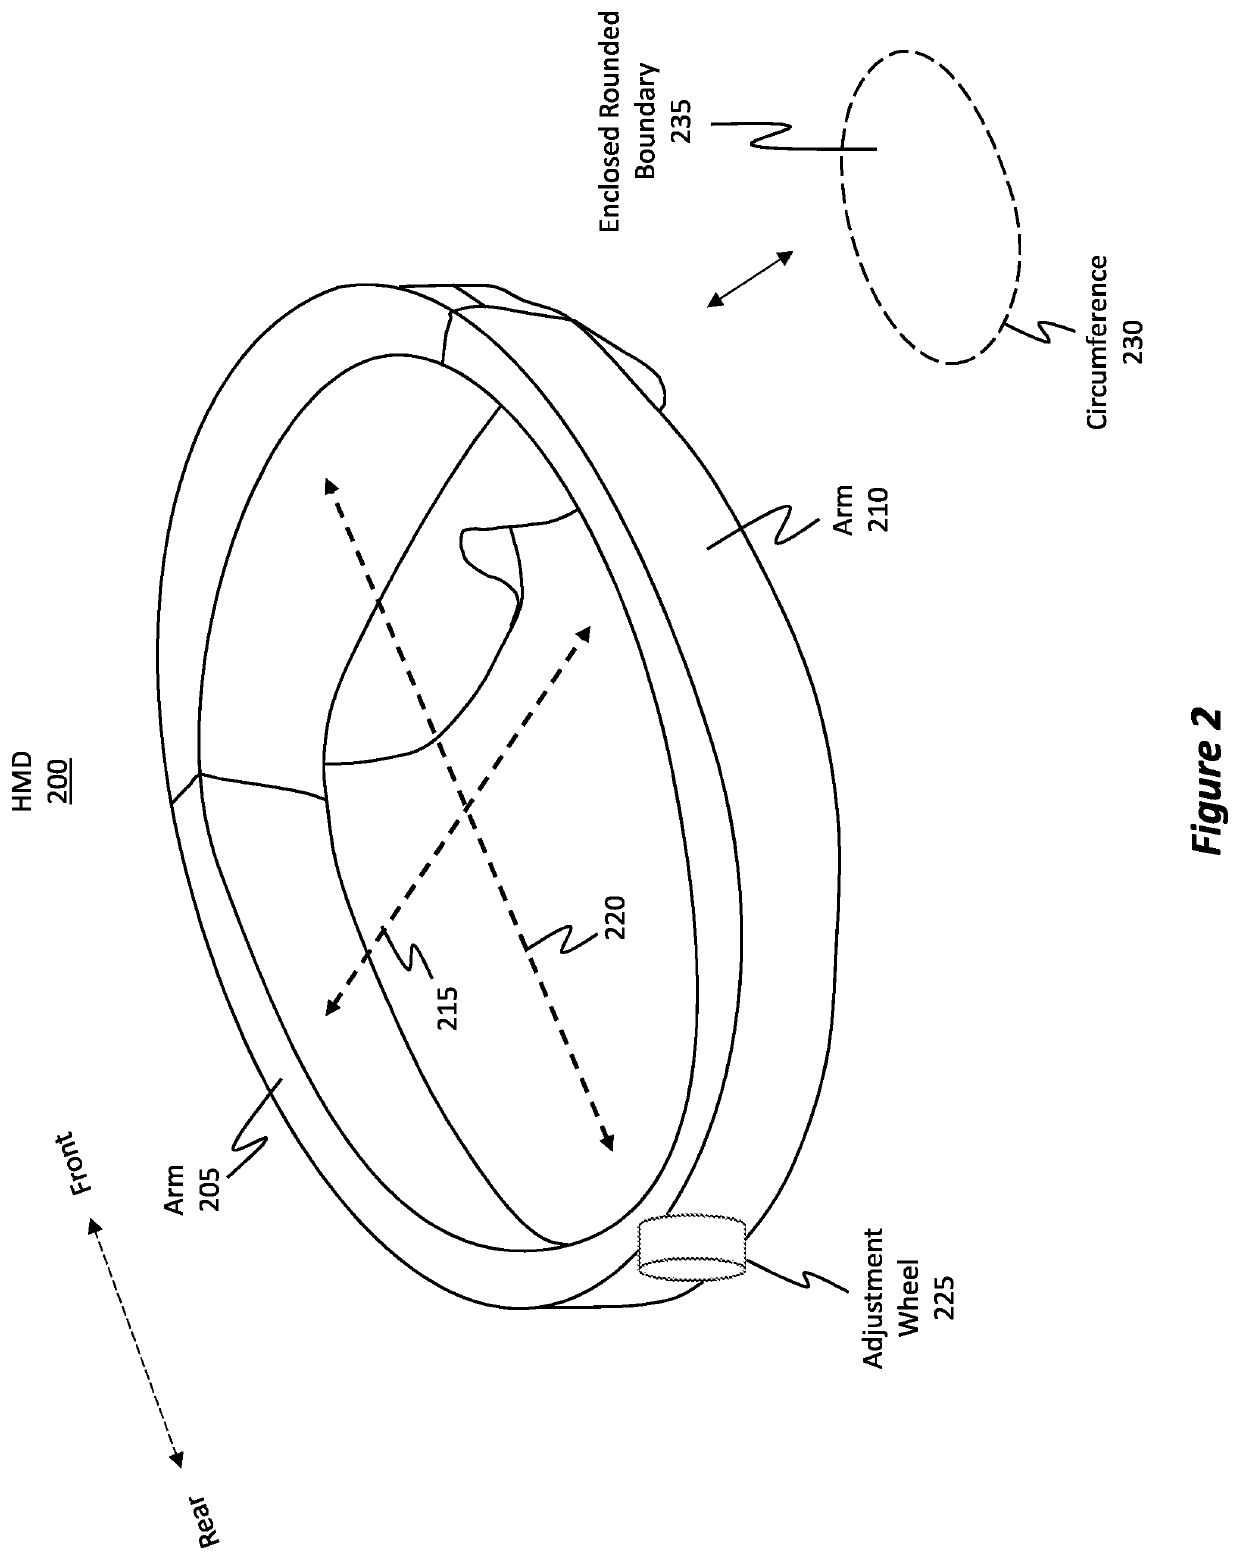 Conformable HMD with dynamically adjustable nested ribbon